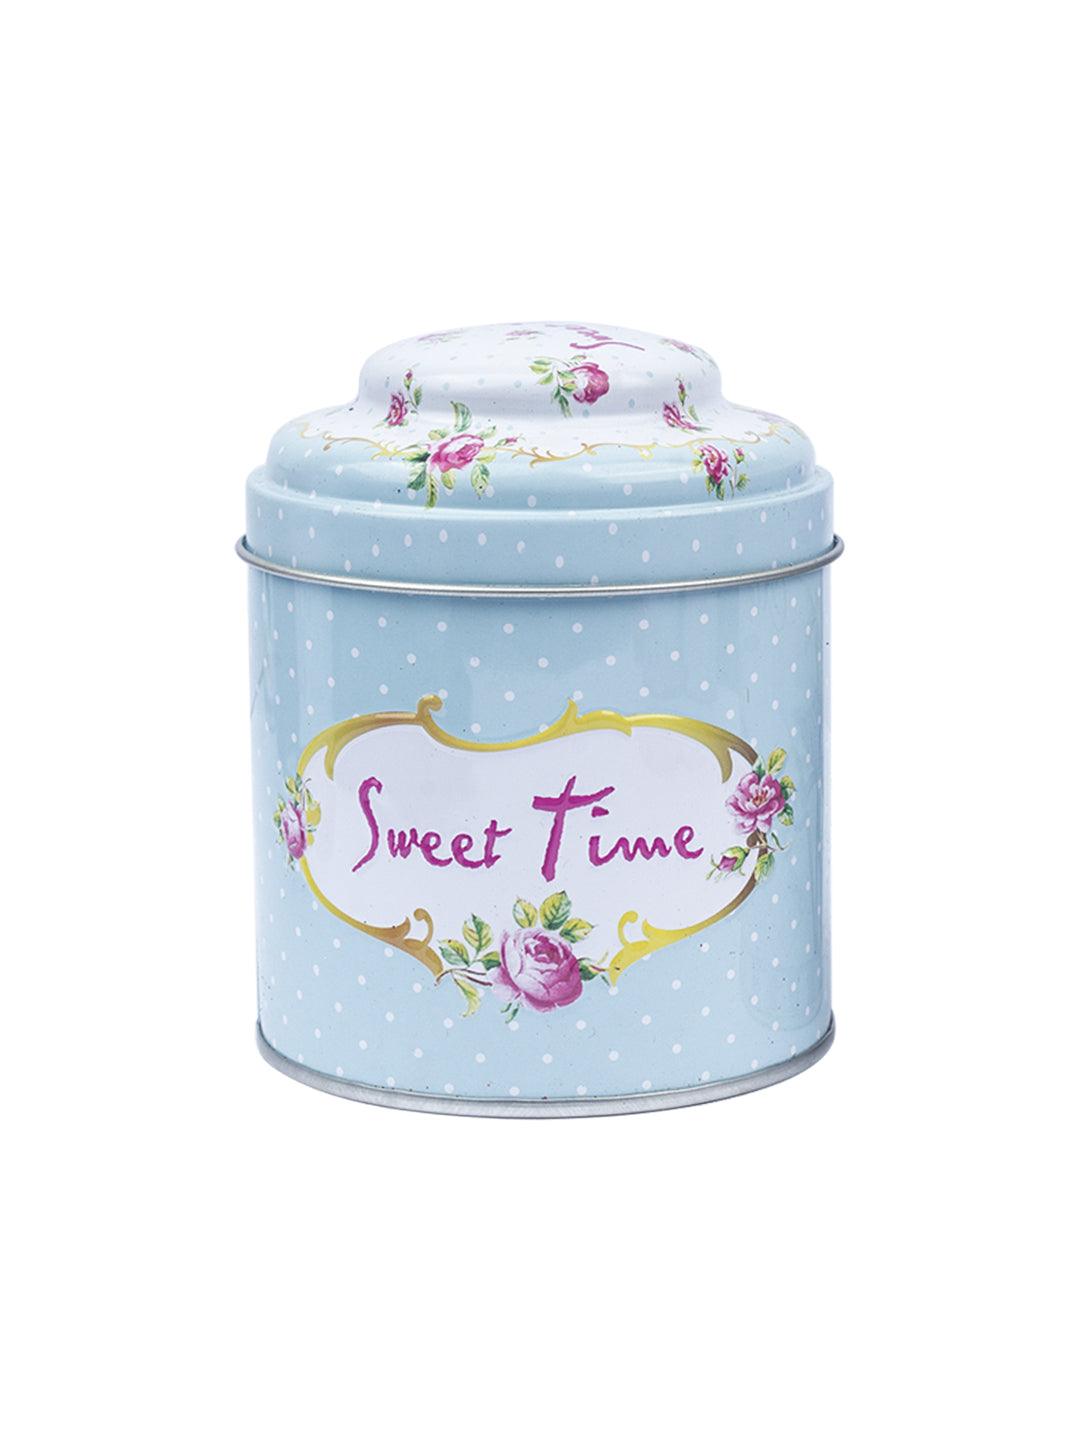 "Sweet Time" Floral Metal Tin Canister - Baby Blue - MARKET 99